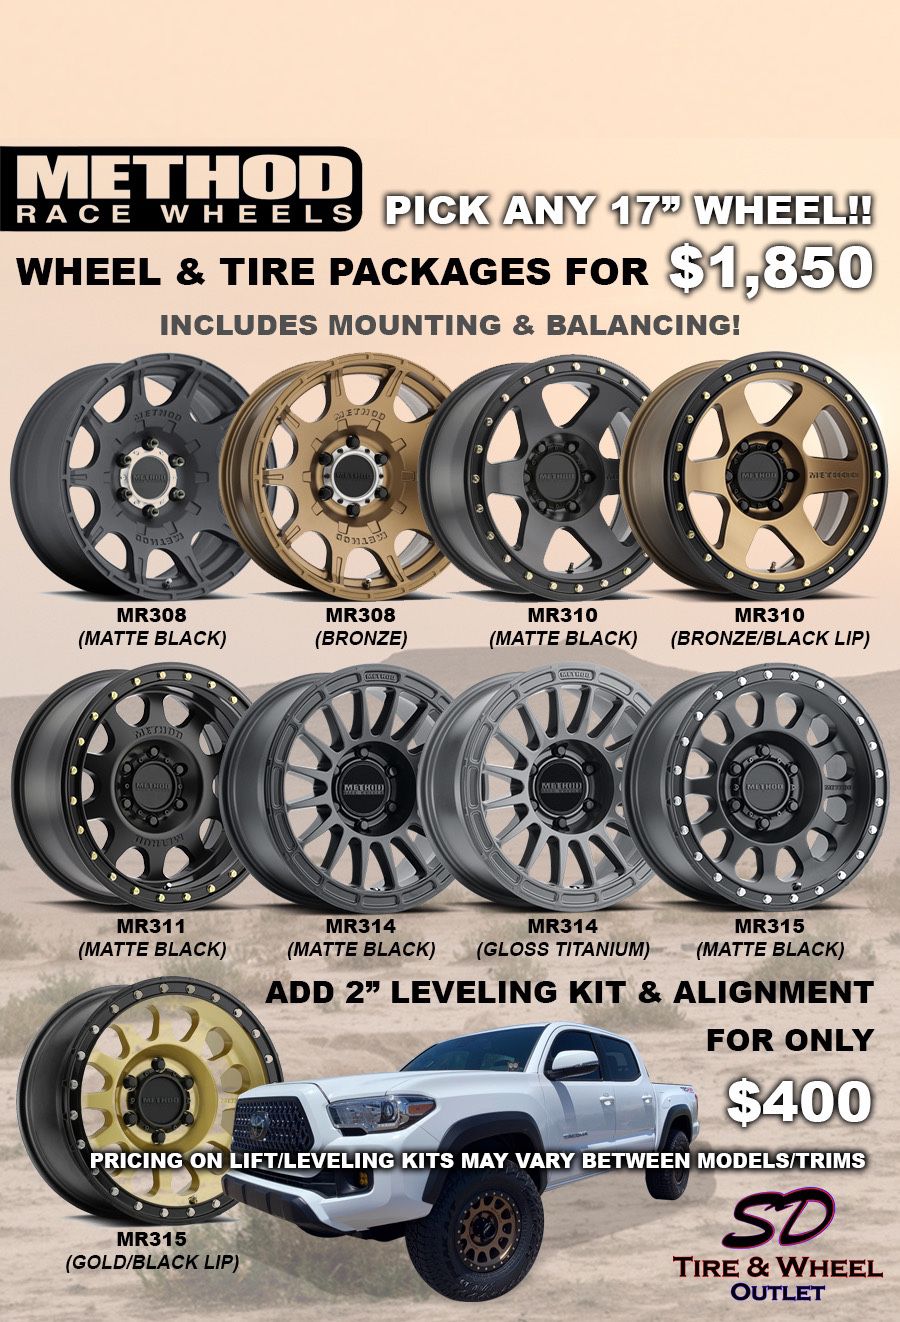 17” Method Wheel & Tire Package with All Terrain Tires (Includes Mounting & Balancing) 4 Brand New Wheels/Tires. Fits Toyota Tacoma/4Runner/FJ Cruiser